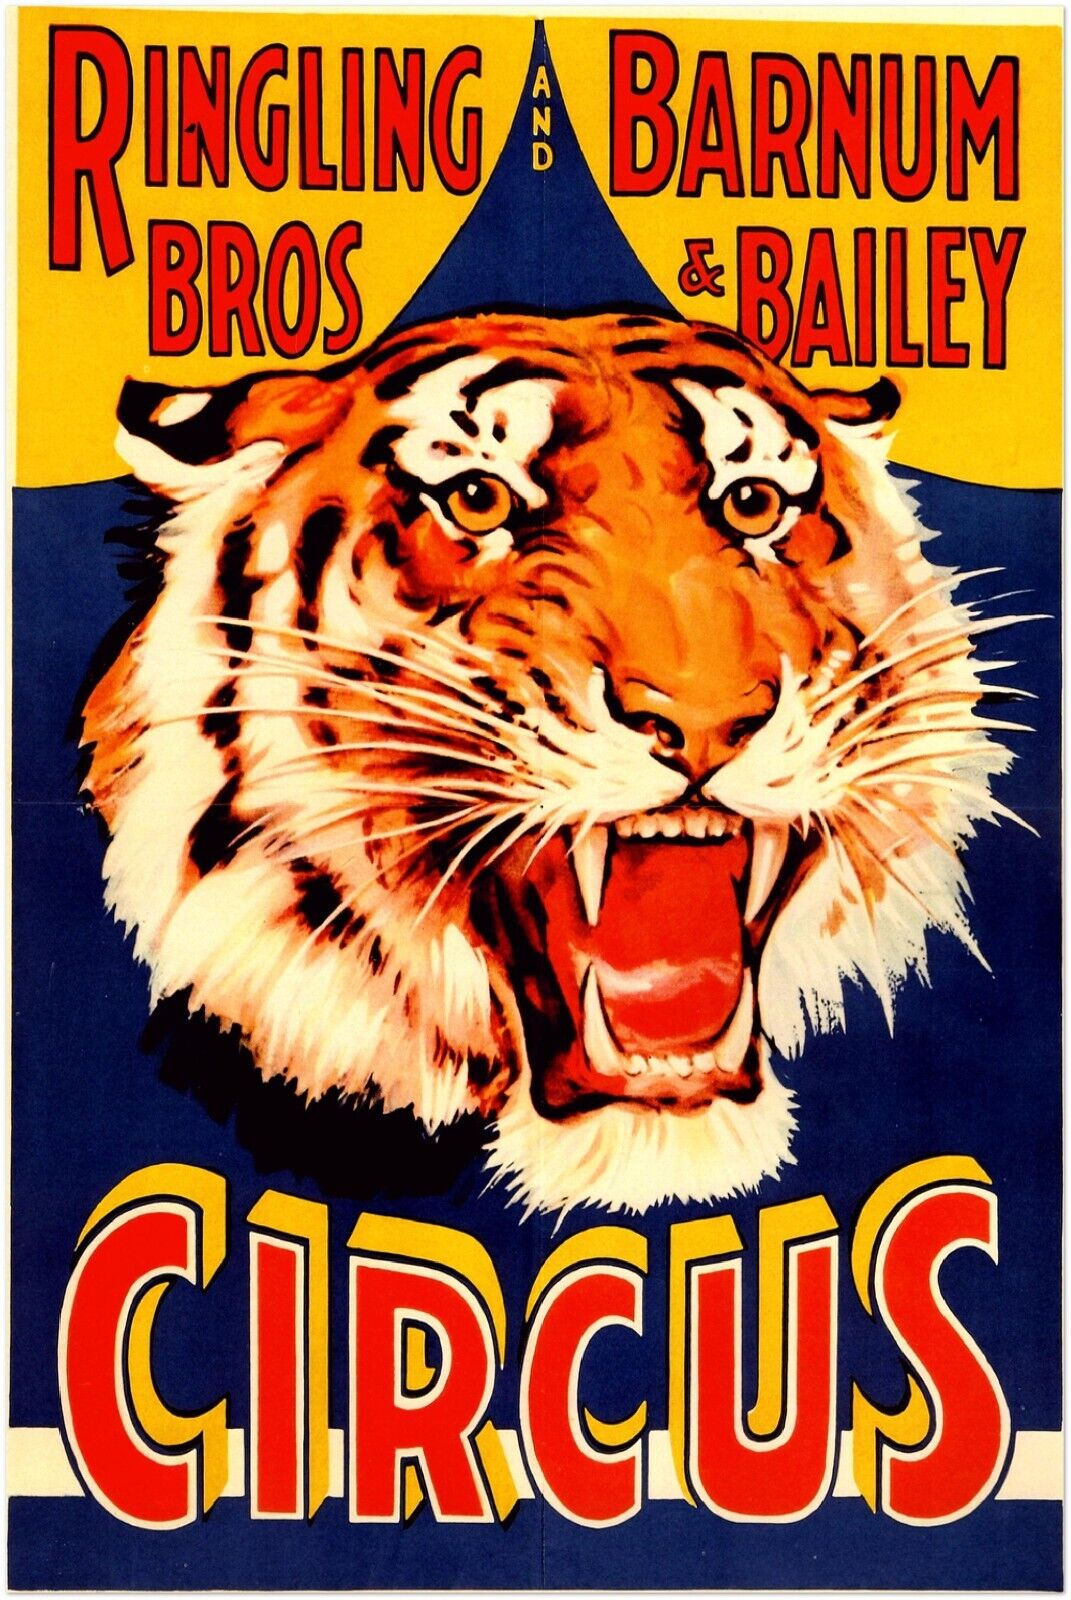 Circus, Clown, Carnivals Ringling Bros Barnum and Bailey Poster Vintage #4